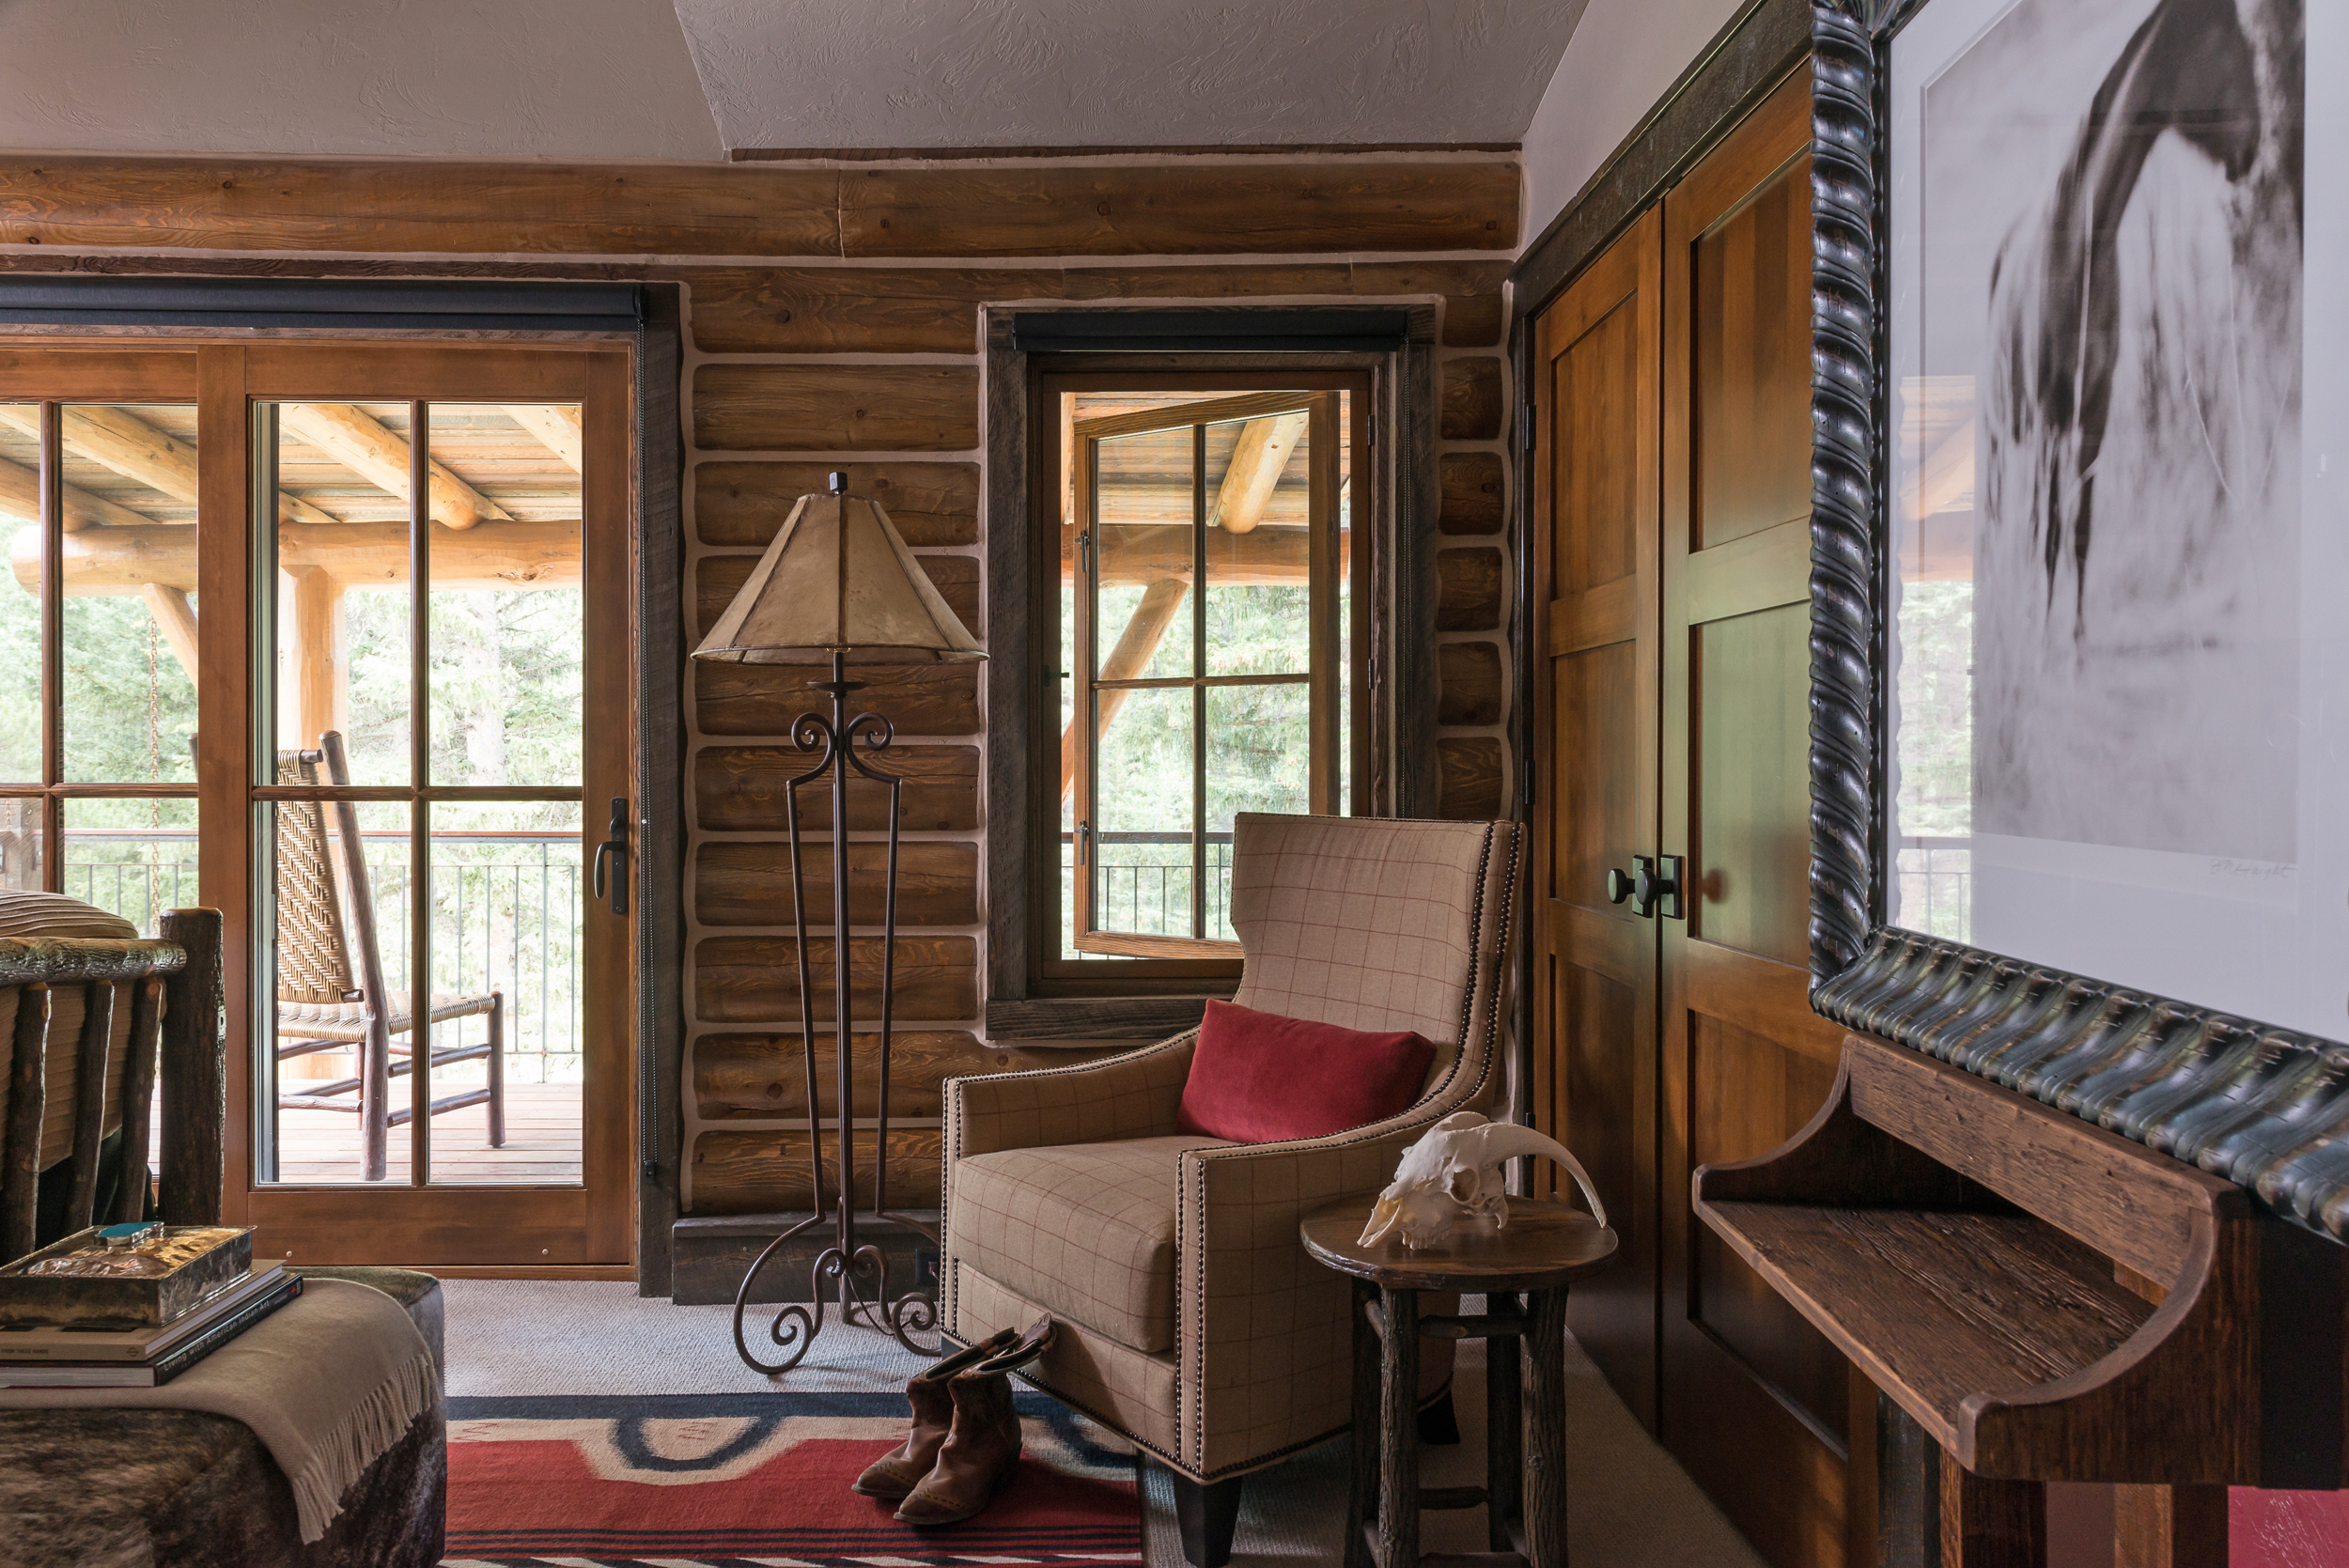 Kibler & Kirch’s Red Lodge, Montana, cabin remodel offers an elevated approach to camp style (photo: Audrey Hall).